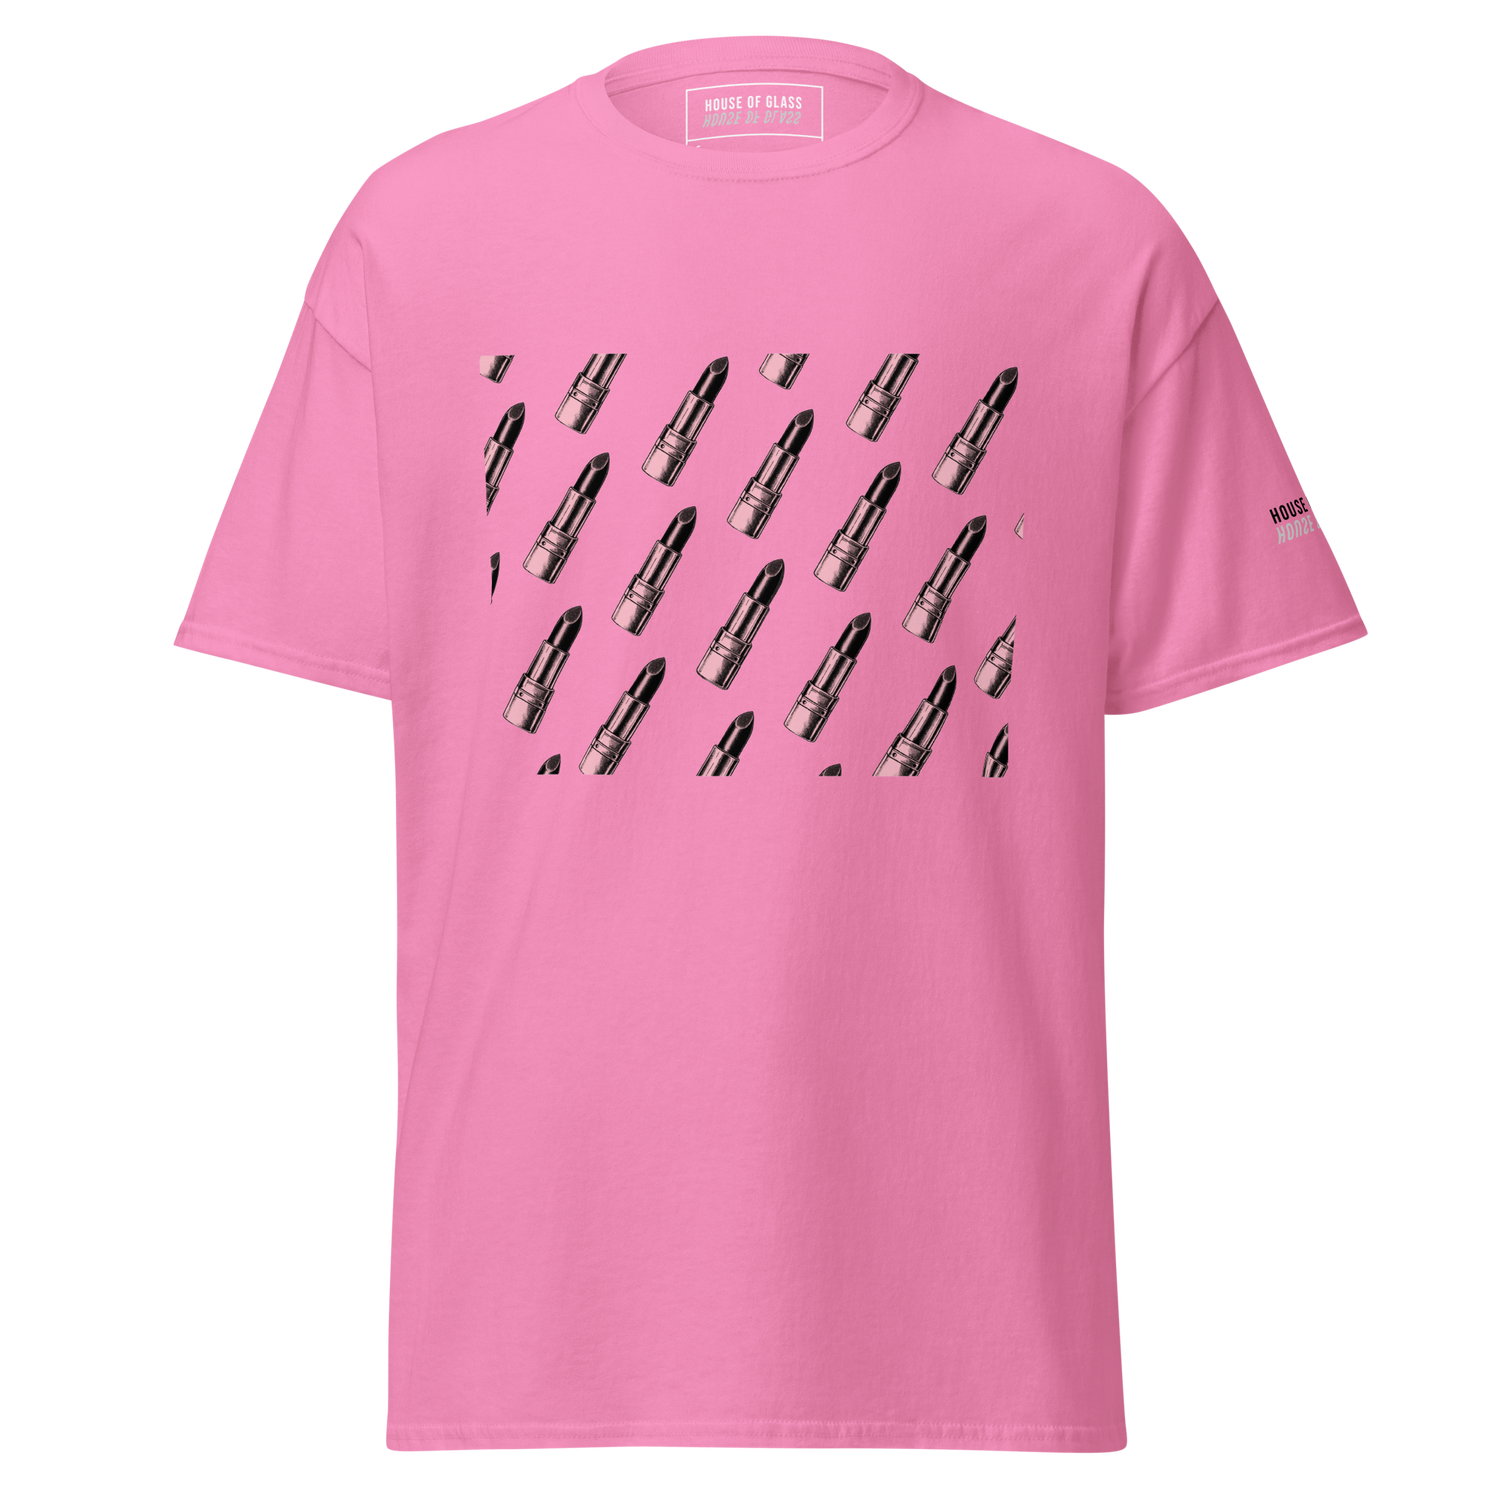 Ghost-style front facing T-shirt mockup of a pink short sleeve t-shirt from the House of Glass Pride Collection. The design features a recurring pattern of a black and white lipstick on the centre front.